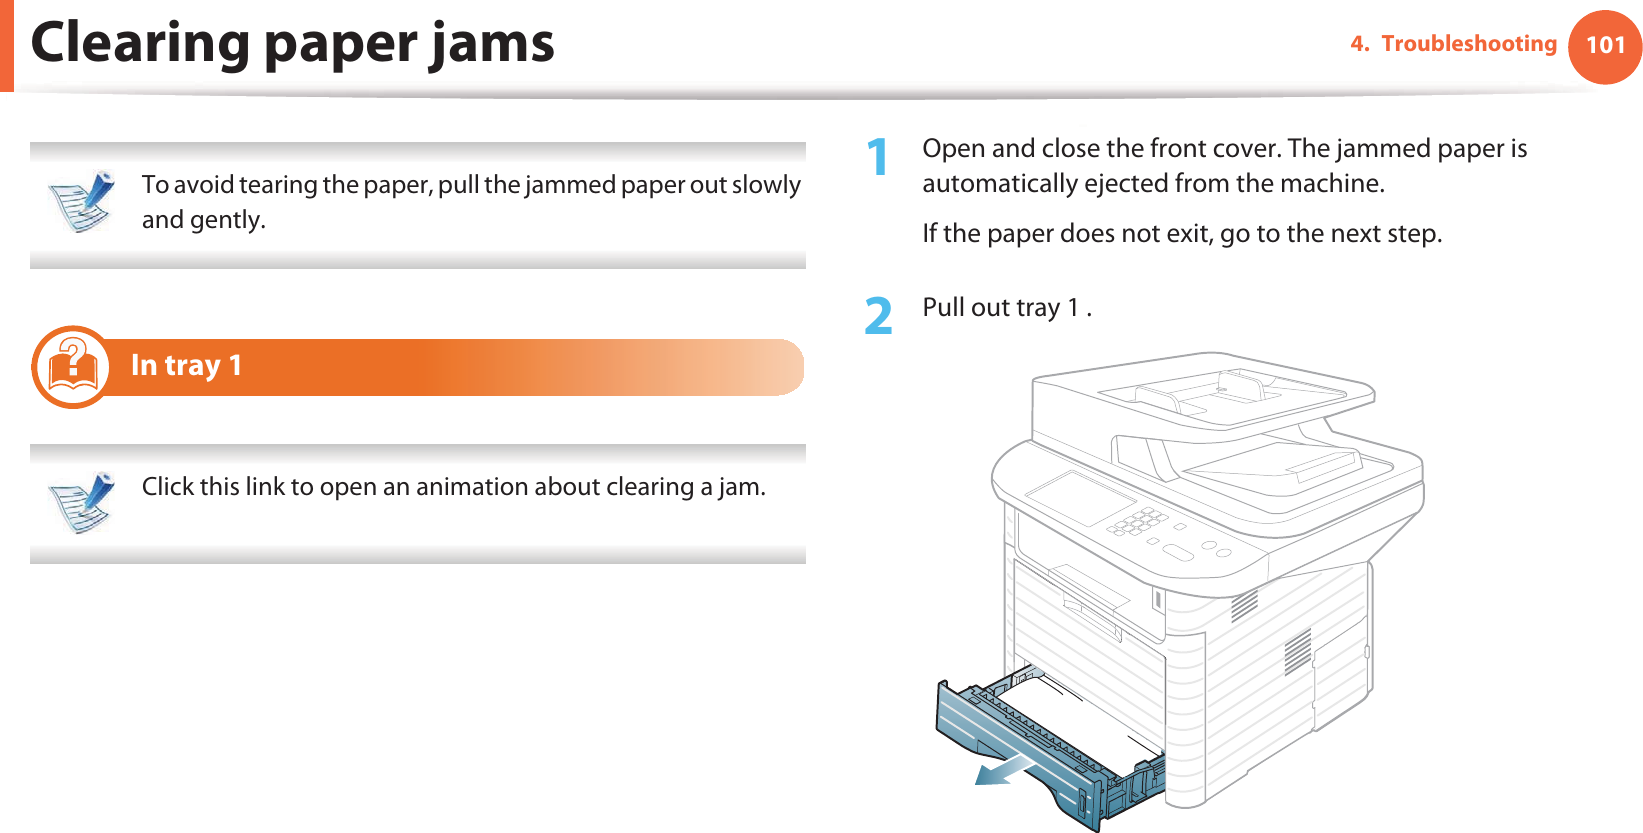 1014. TroubleshootingClearing paper jams To avoid tearing the paper, pull the jammed paper out slowly and gently.  5 In tray 1 Click this link to open an animation about clearing a jam. 1Open and close the front cover. The jammed paper is automatically ejected from the machine.If the paper does not exit, go to the next step.2  Pull out tray 1 .